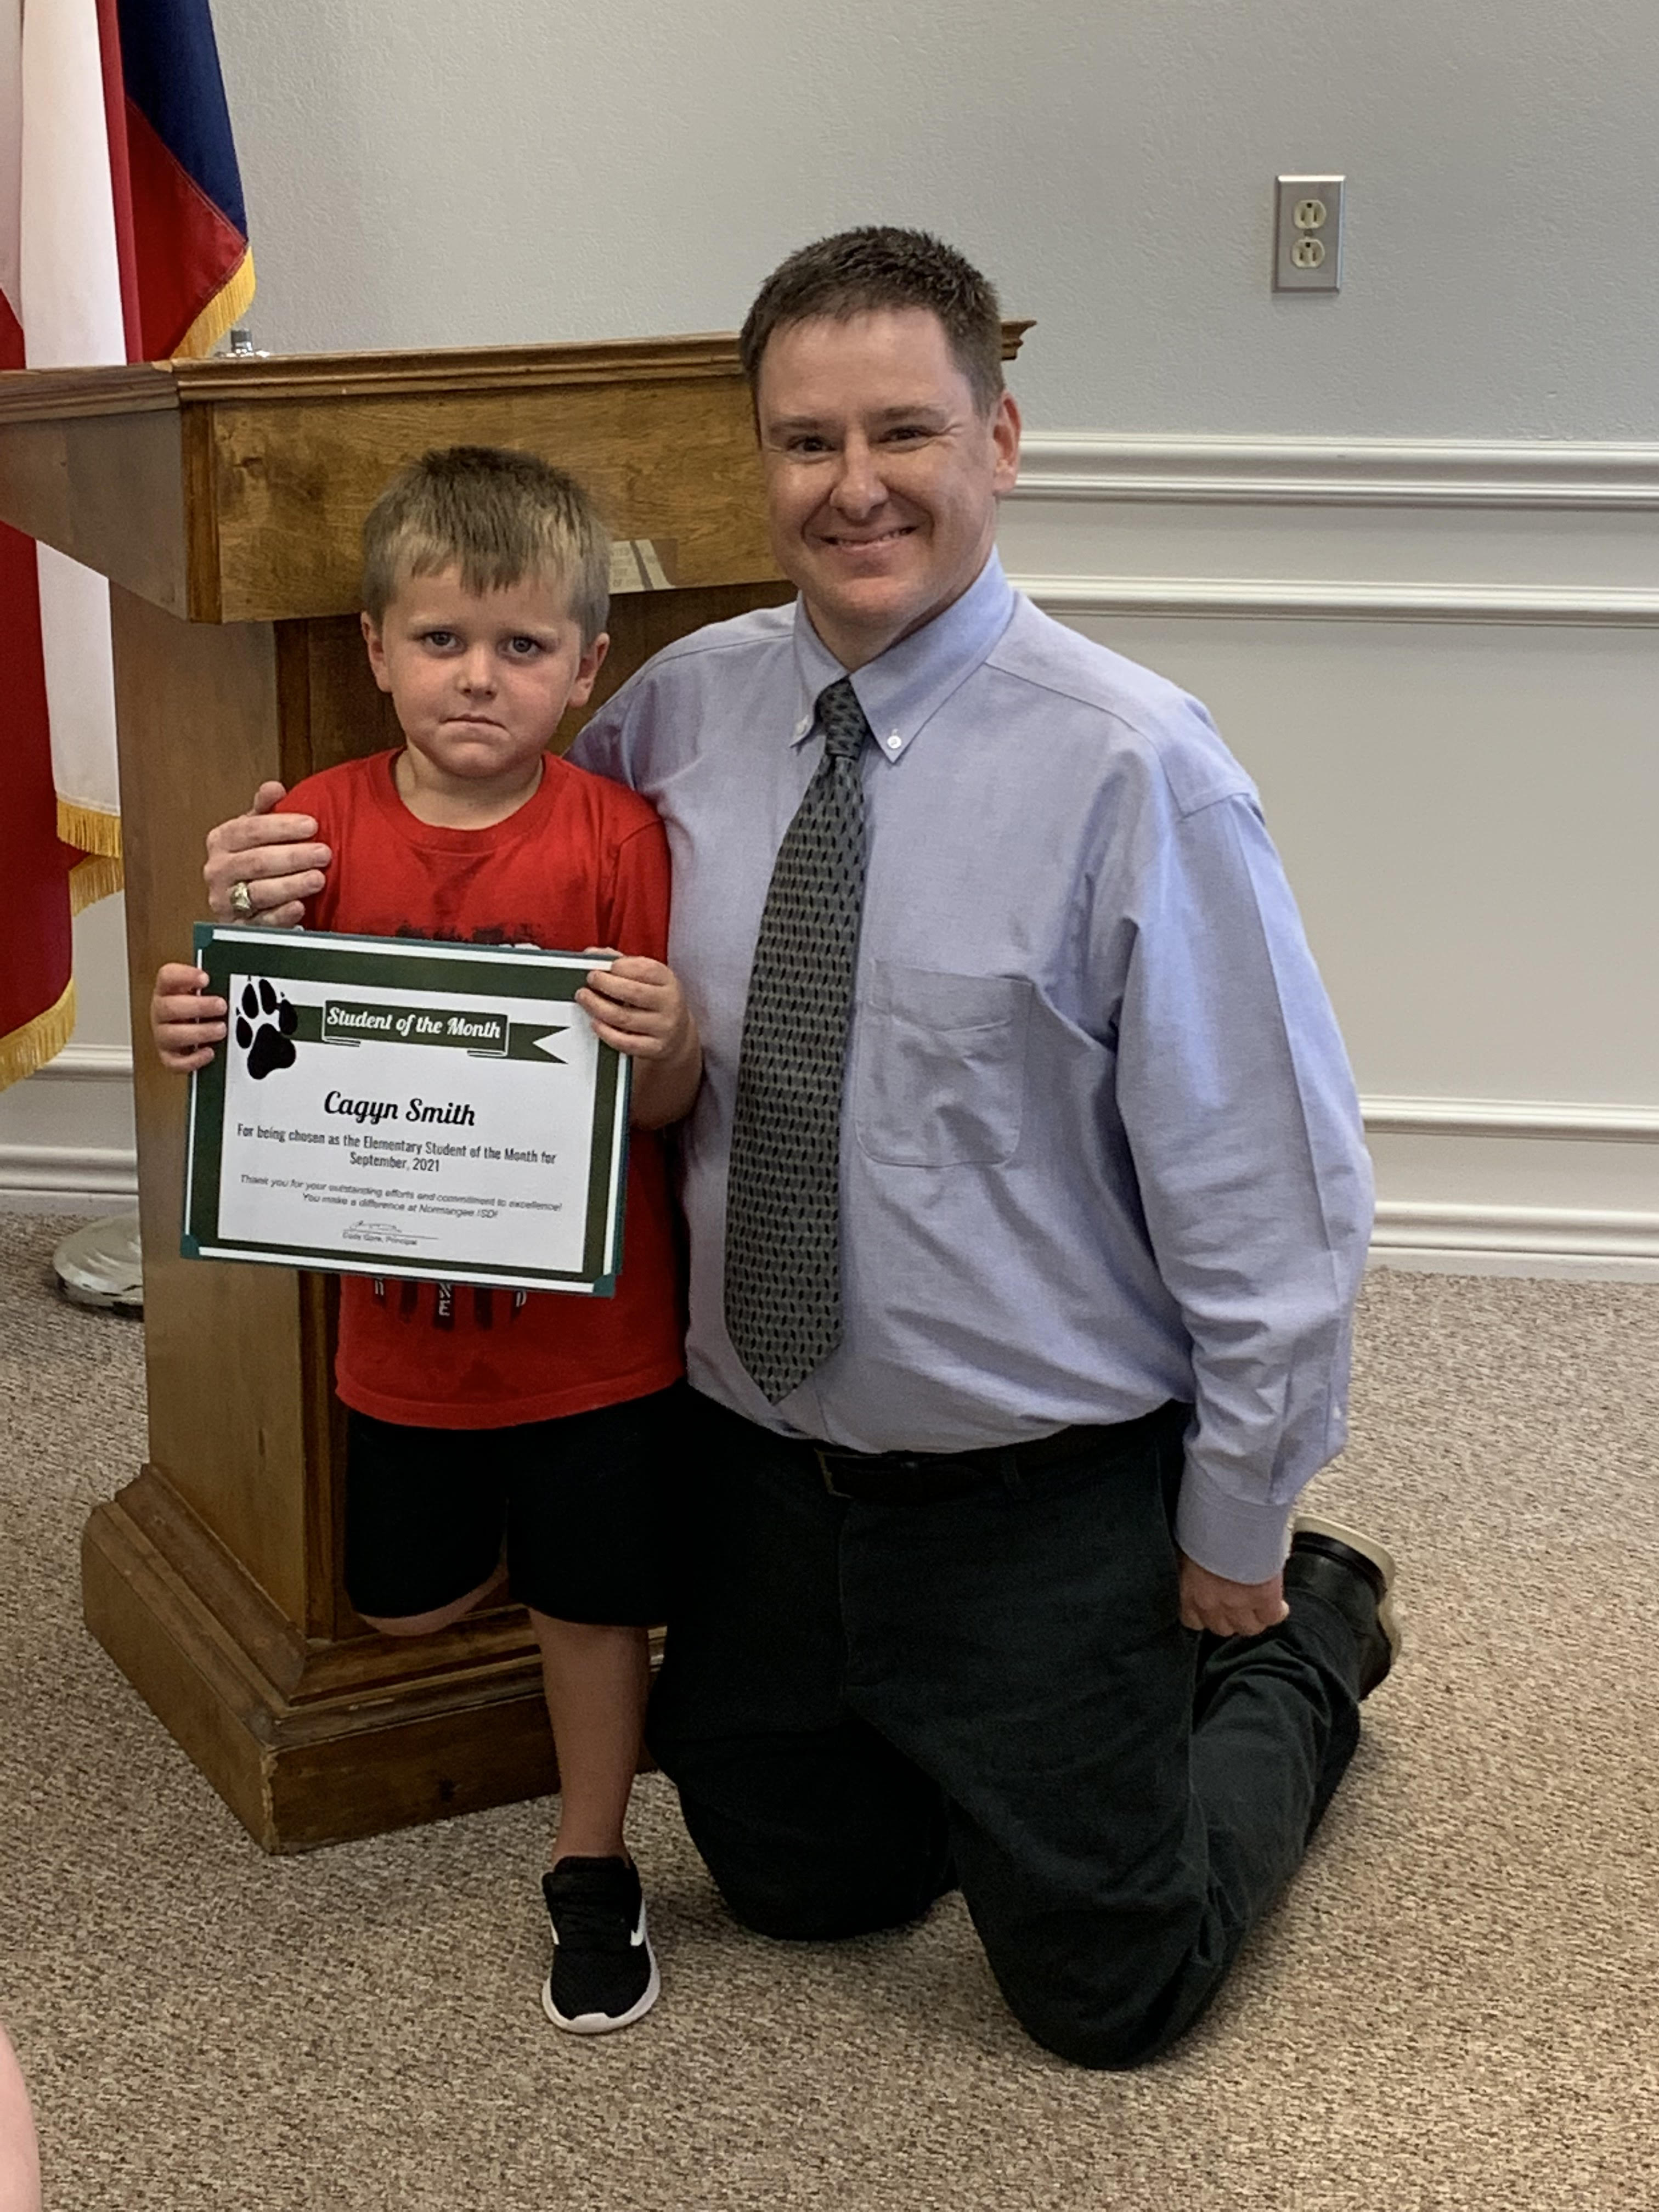 Cagyn Student of the Month